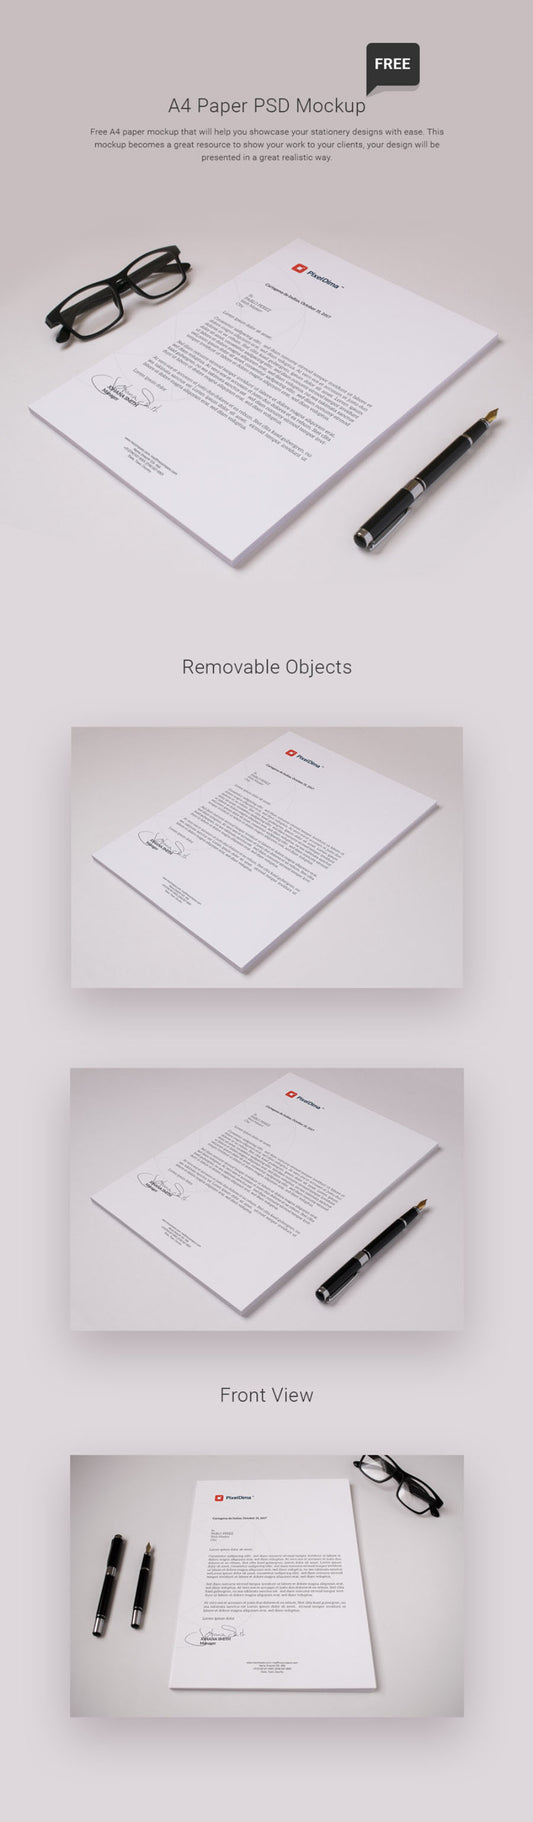 Free Isometric Stationery A4 Paper PSD Mockup